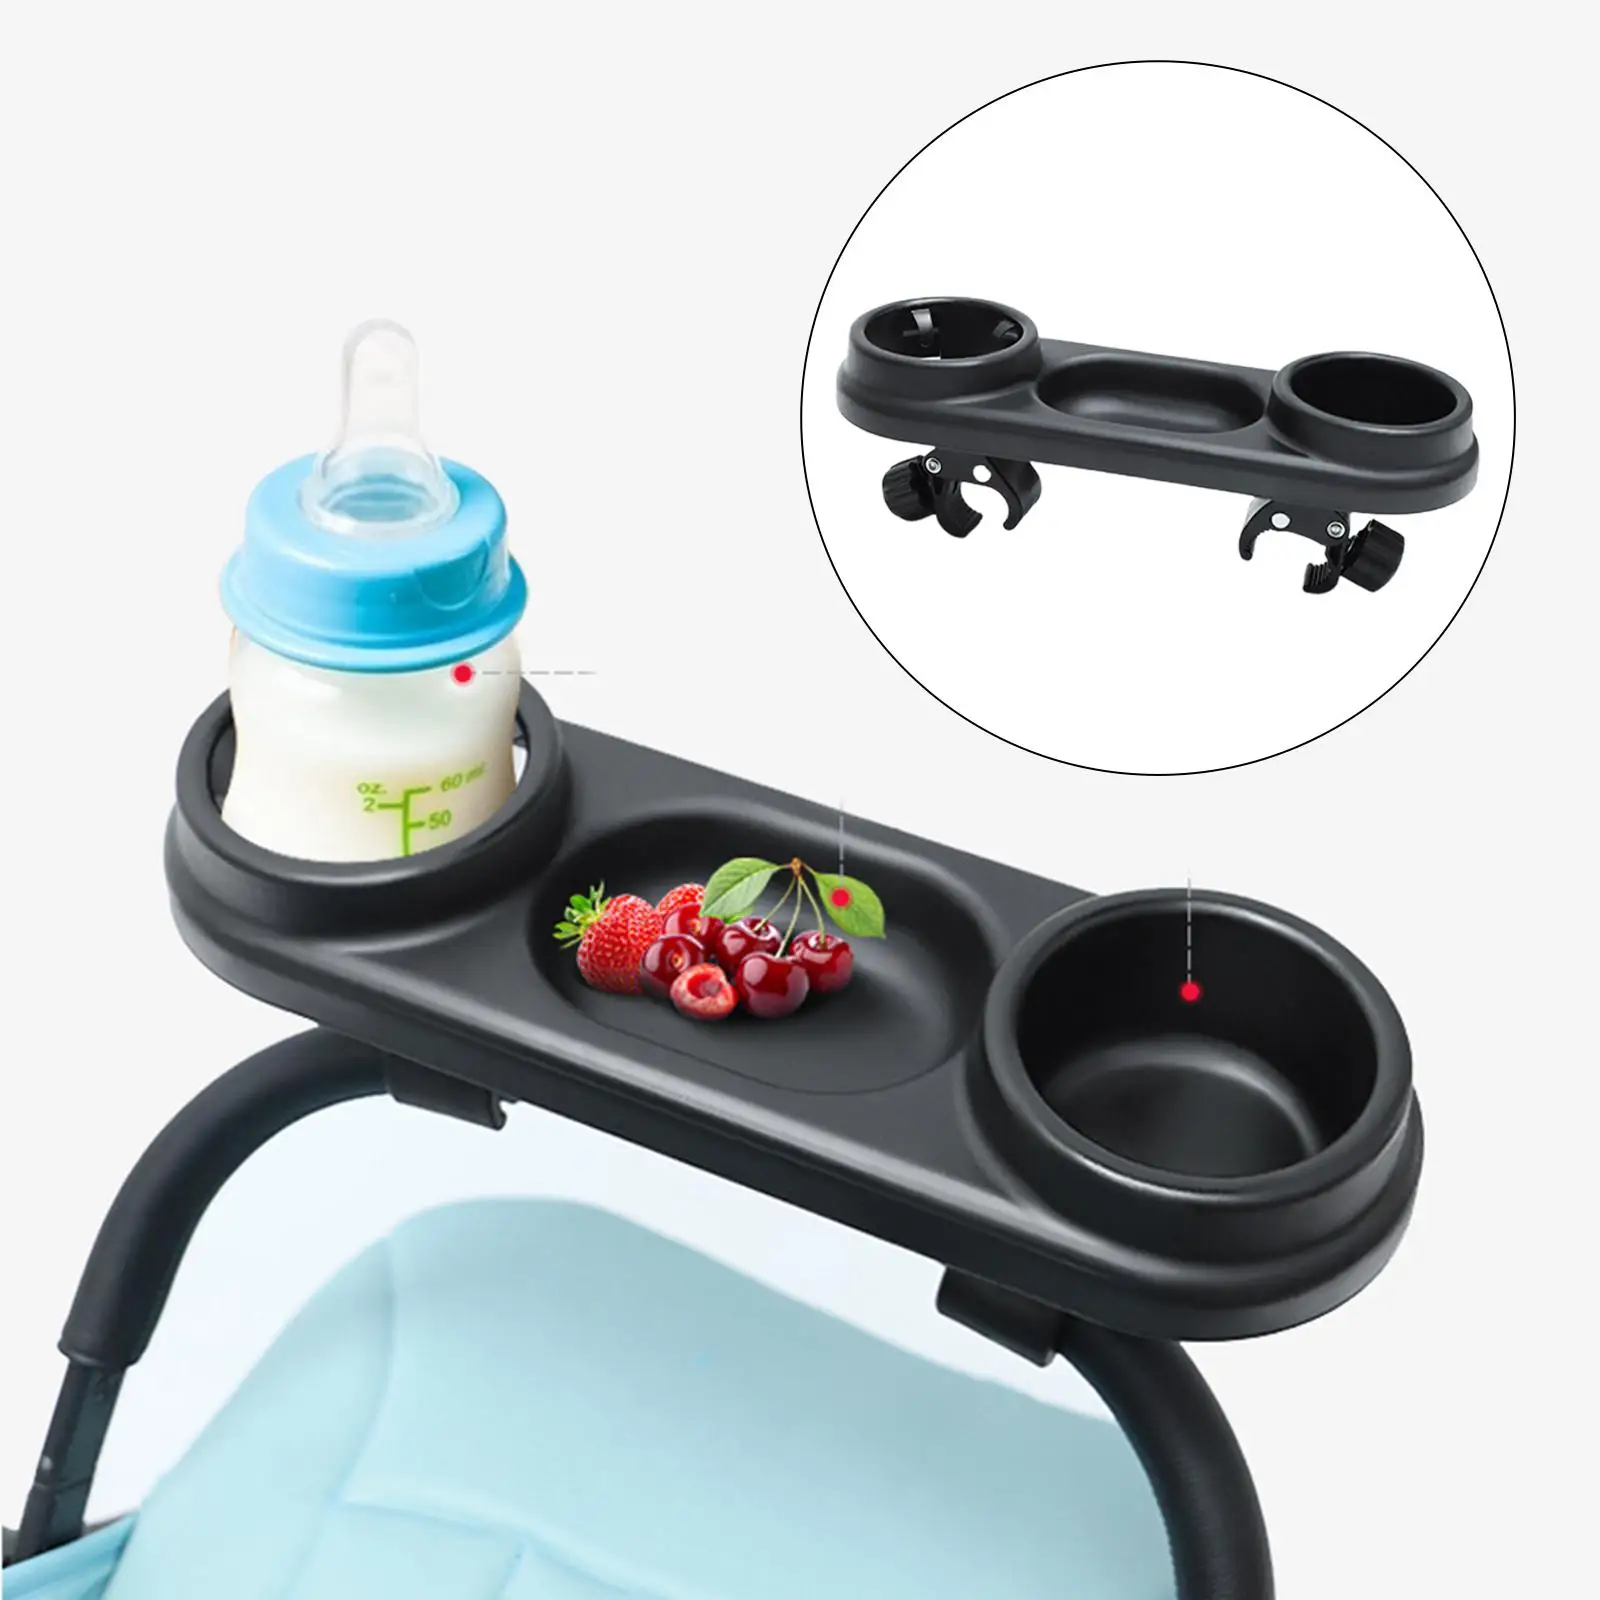 Stroller Tray Snack Tray and cup  Holder, Fits Most Types of Strollers with Armrests Durable Accessories Stable Fixation Grip